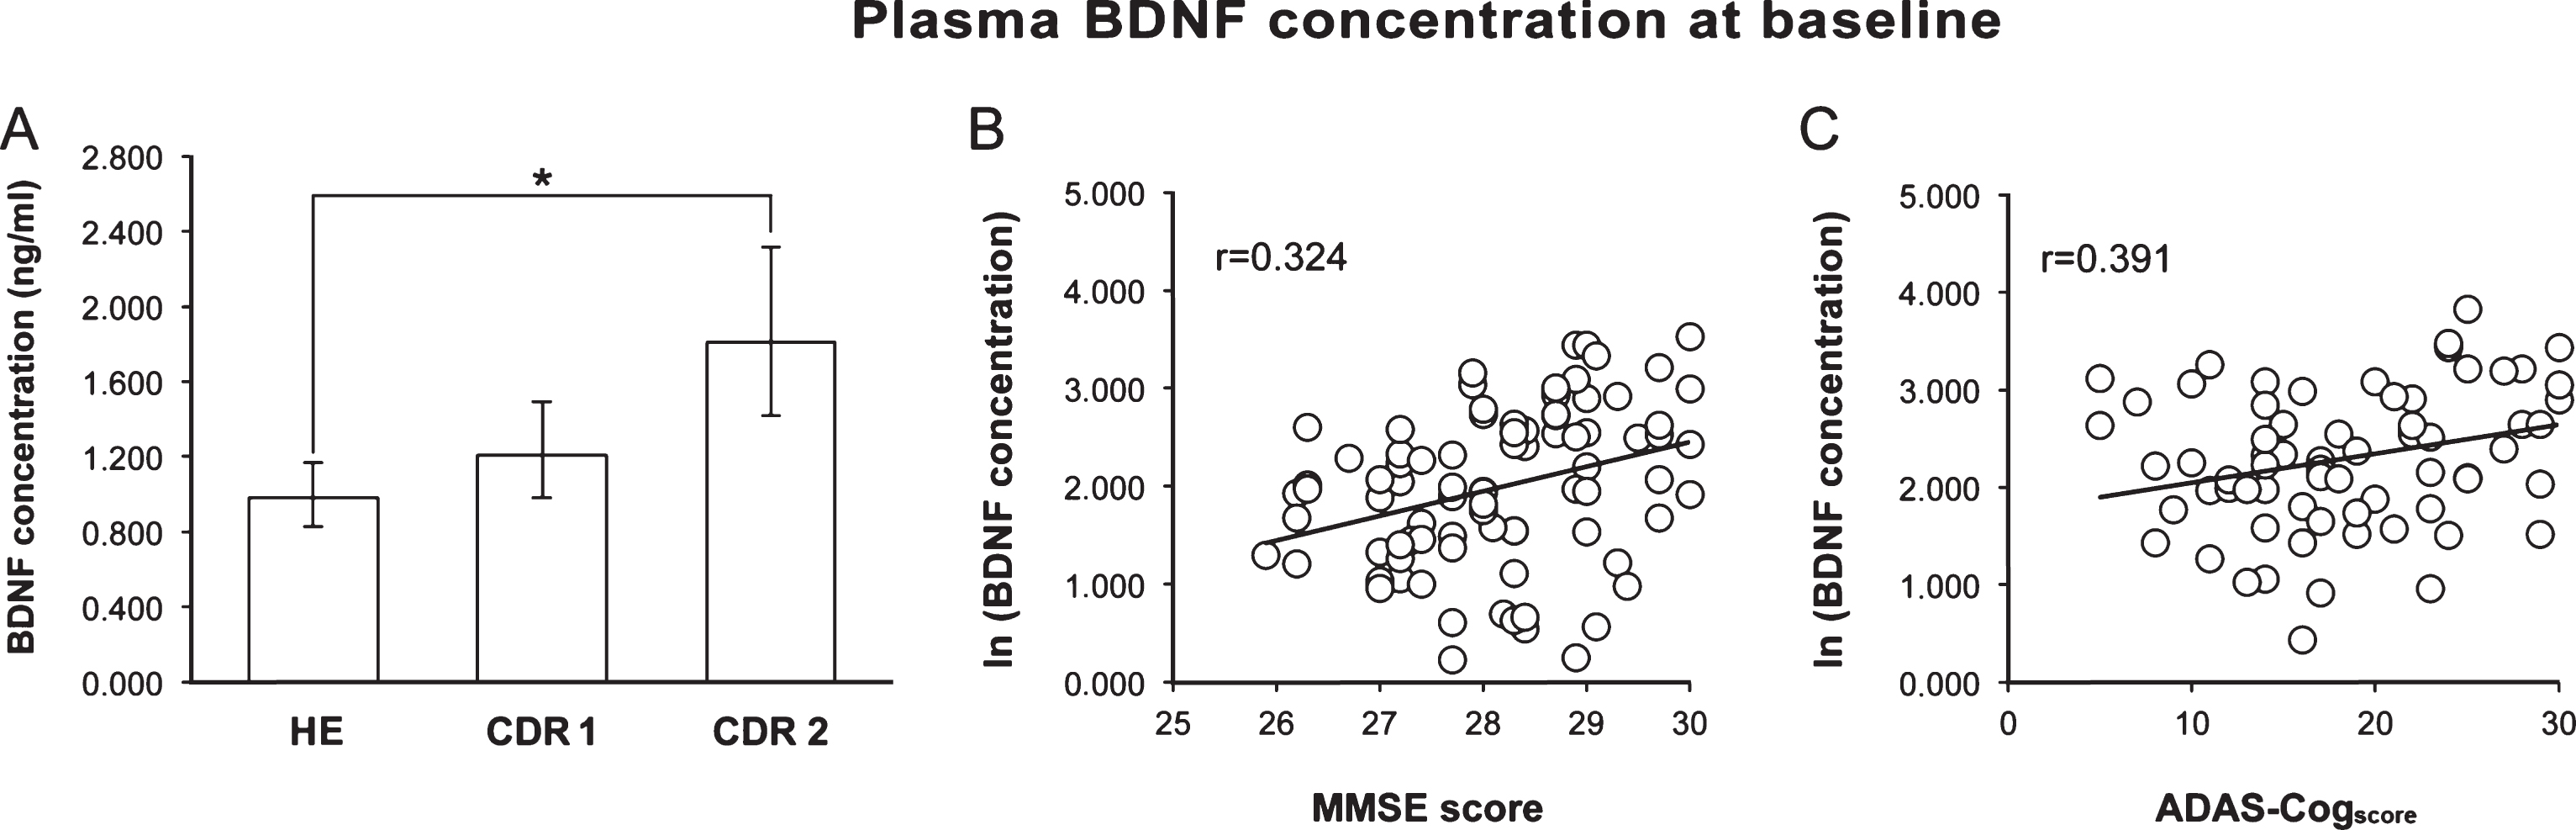 A) Baseline pBDNF was significantly higher in patients with moderate AD (CDR 2) than in healthy subjects (HE). B) In healthy subjects, a better cognitive status (higher MMSE score) was associated to a higher pBDNF. C) In AD patients, more impaired cognition (higher ADAS-Cogscore) was associated to higher pBDNF. In A, columns and error bars represent back-transformed means and 95% confidence interval. In B and C, a constant was added to the log-transformed data to avoid showing negative values.